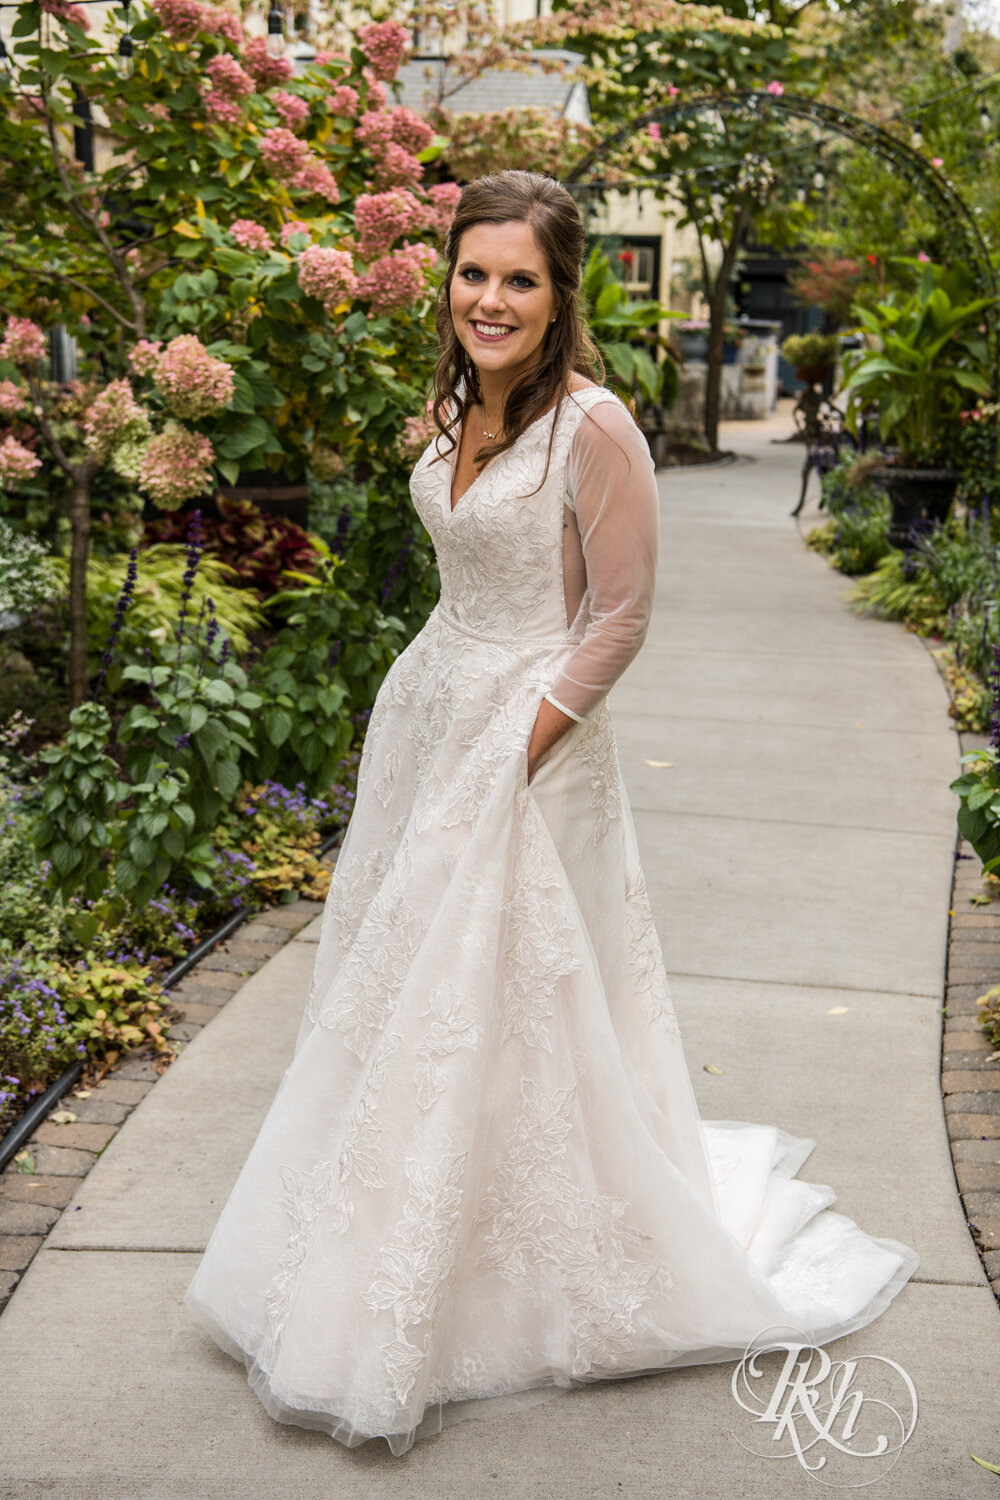 Bride smiles with hands in pockets at Kellerman's Event Center in White Bear Lake, Minnesota.